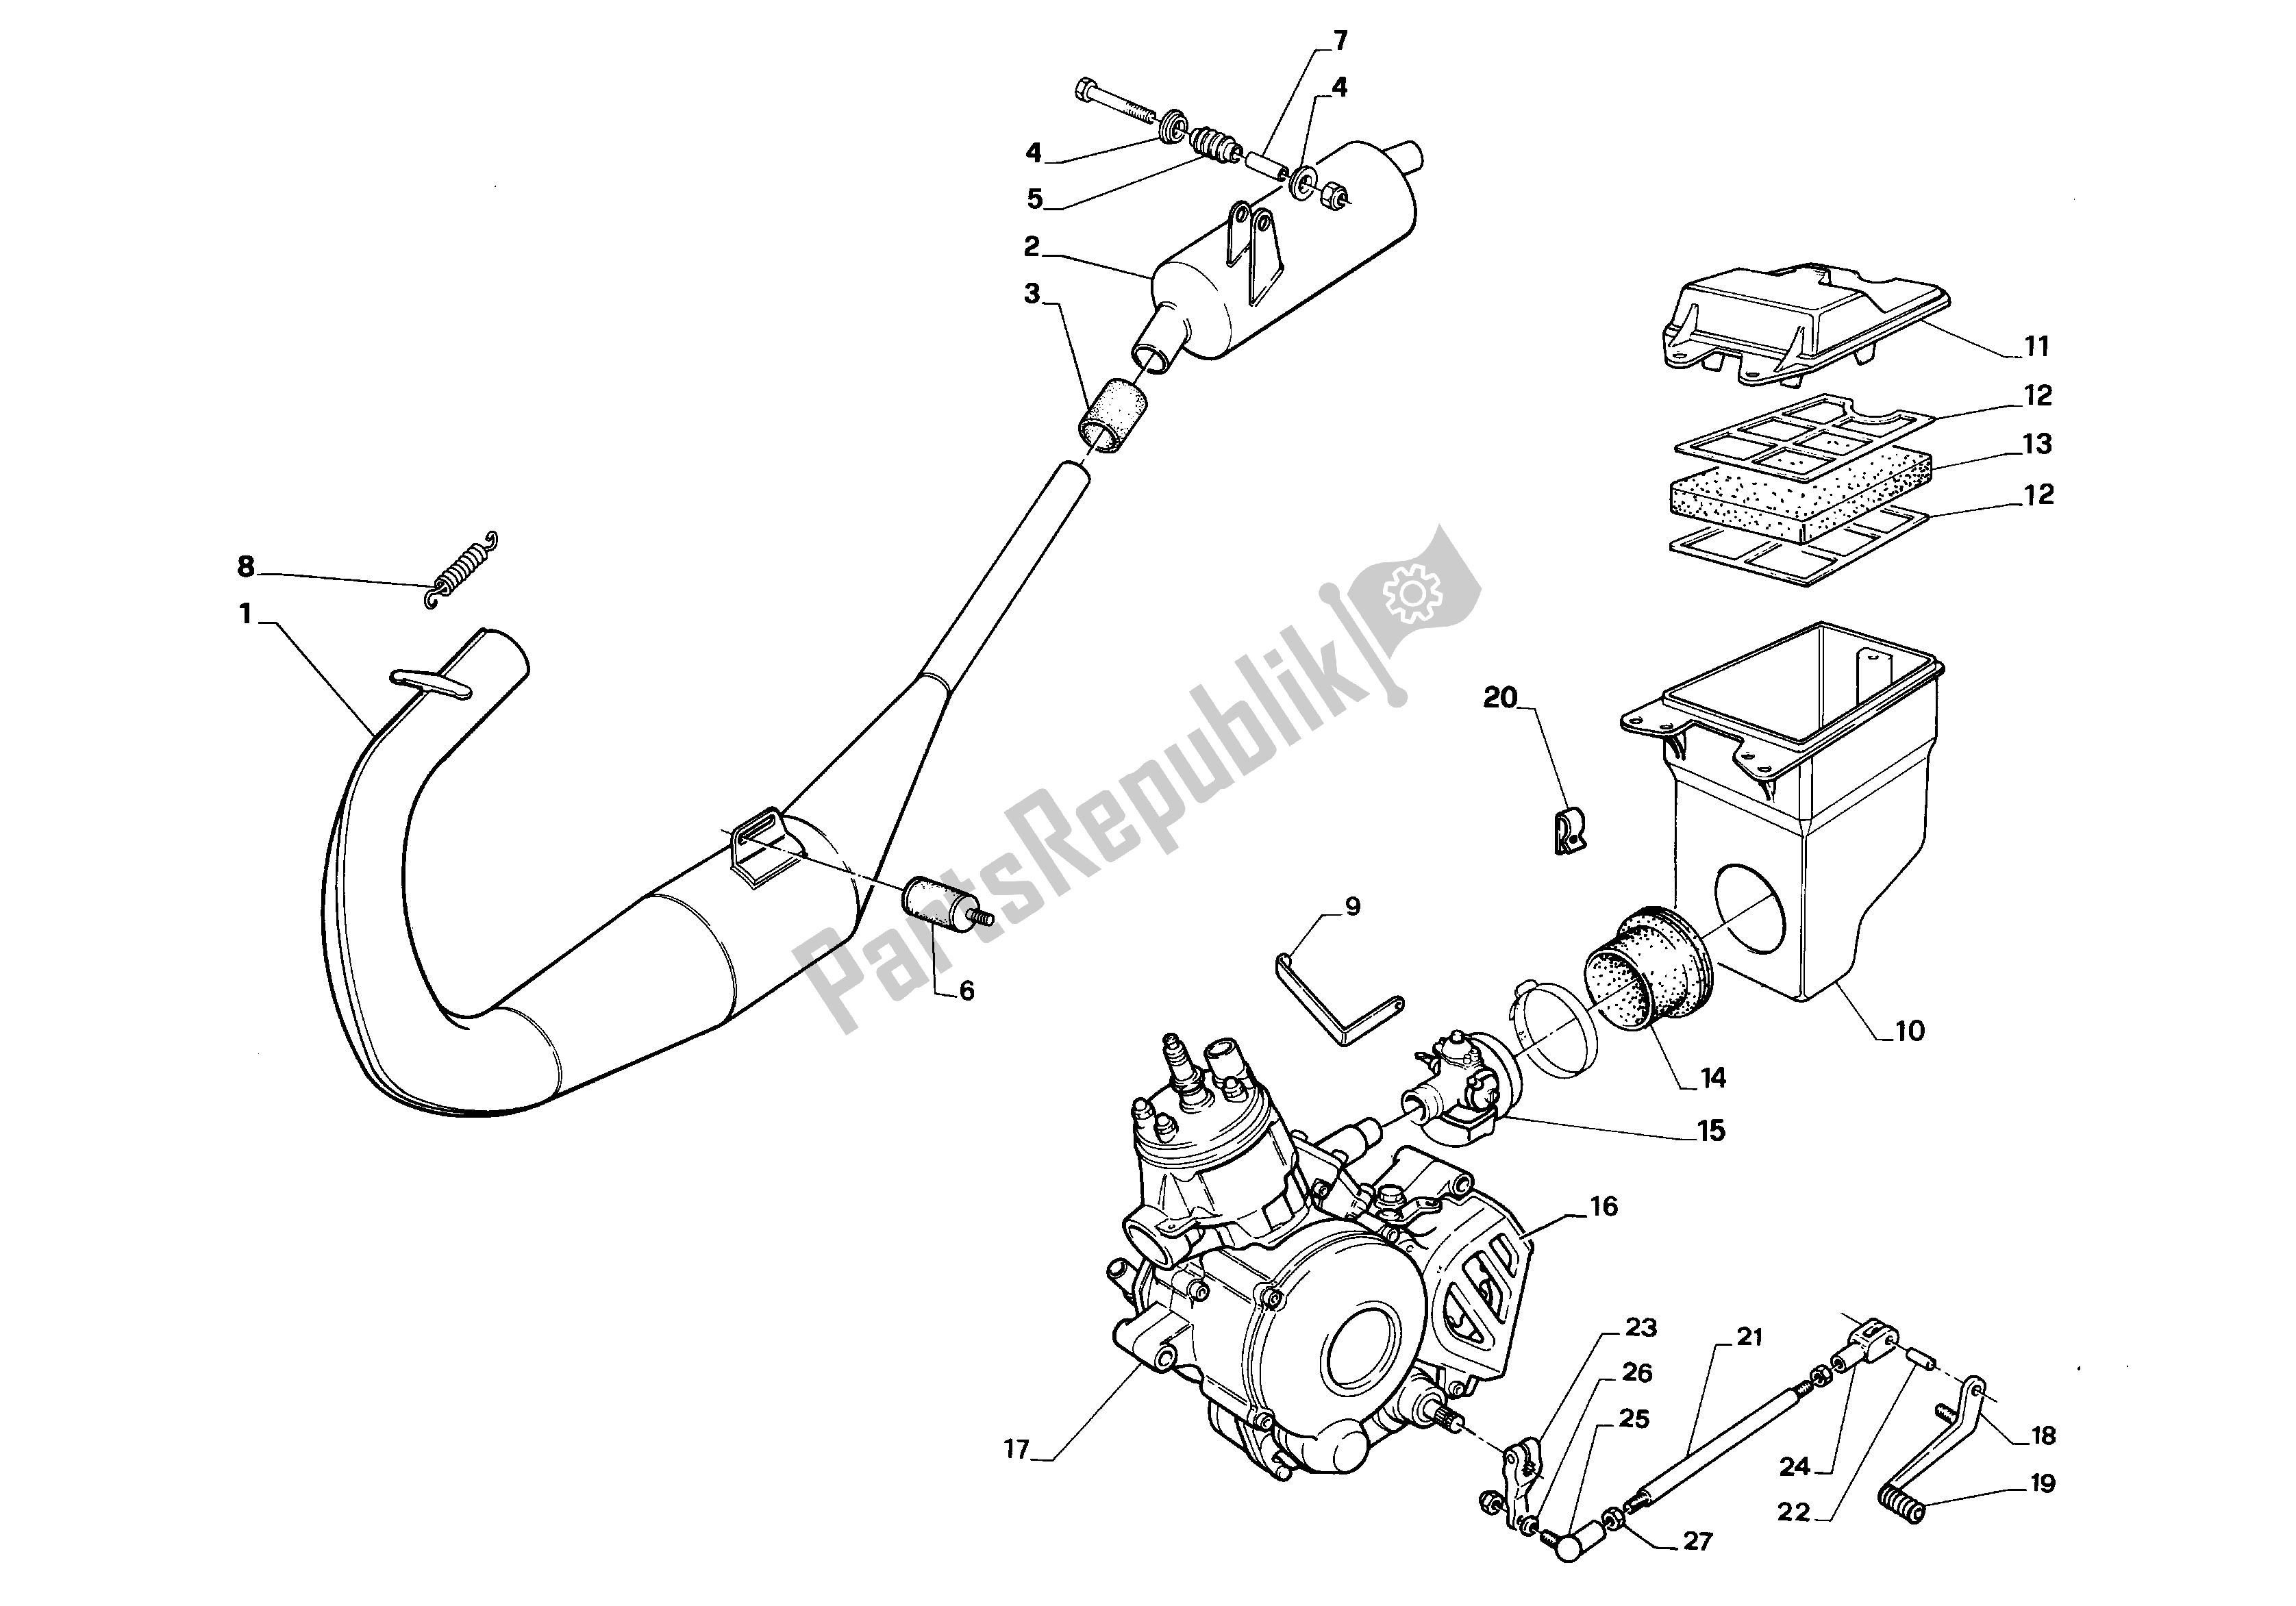 All parts for the Exhaust Assembly of the Aprilia RS 50 1993